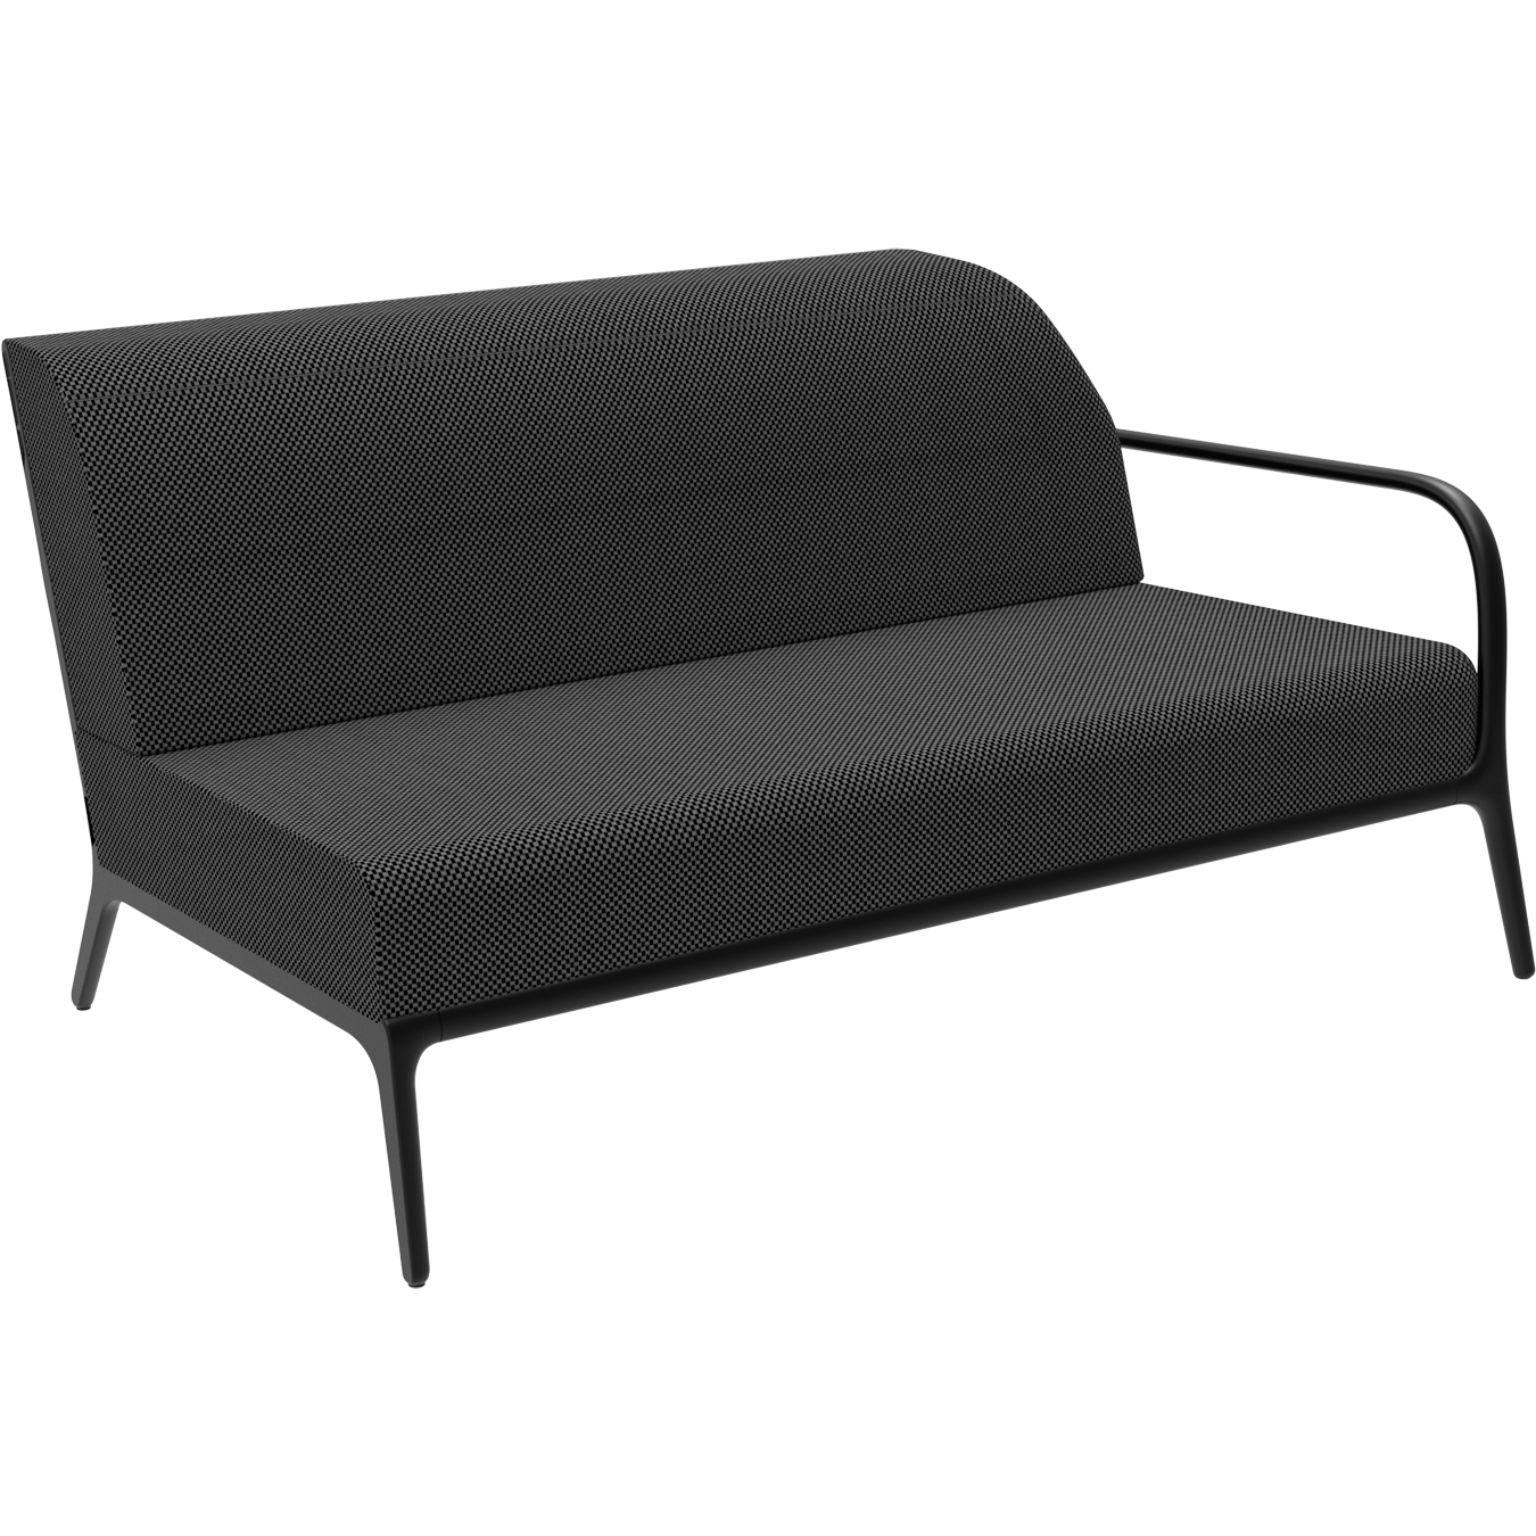 Xaloc left 160 black modular sofa by MOWEE
Dimensions: D100 x W160 x H81 cm (Seat Height 42cm)
Material: Aluminium, Textile
Weight: 37 kg
Also Available in different colours and finishes.

 Xaloc synthesizes the lines of interior furniture to